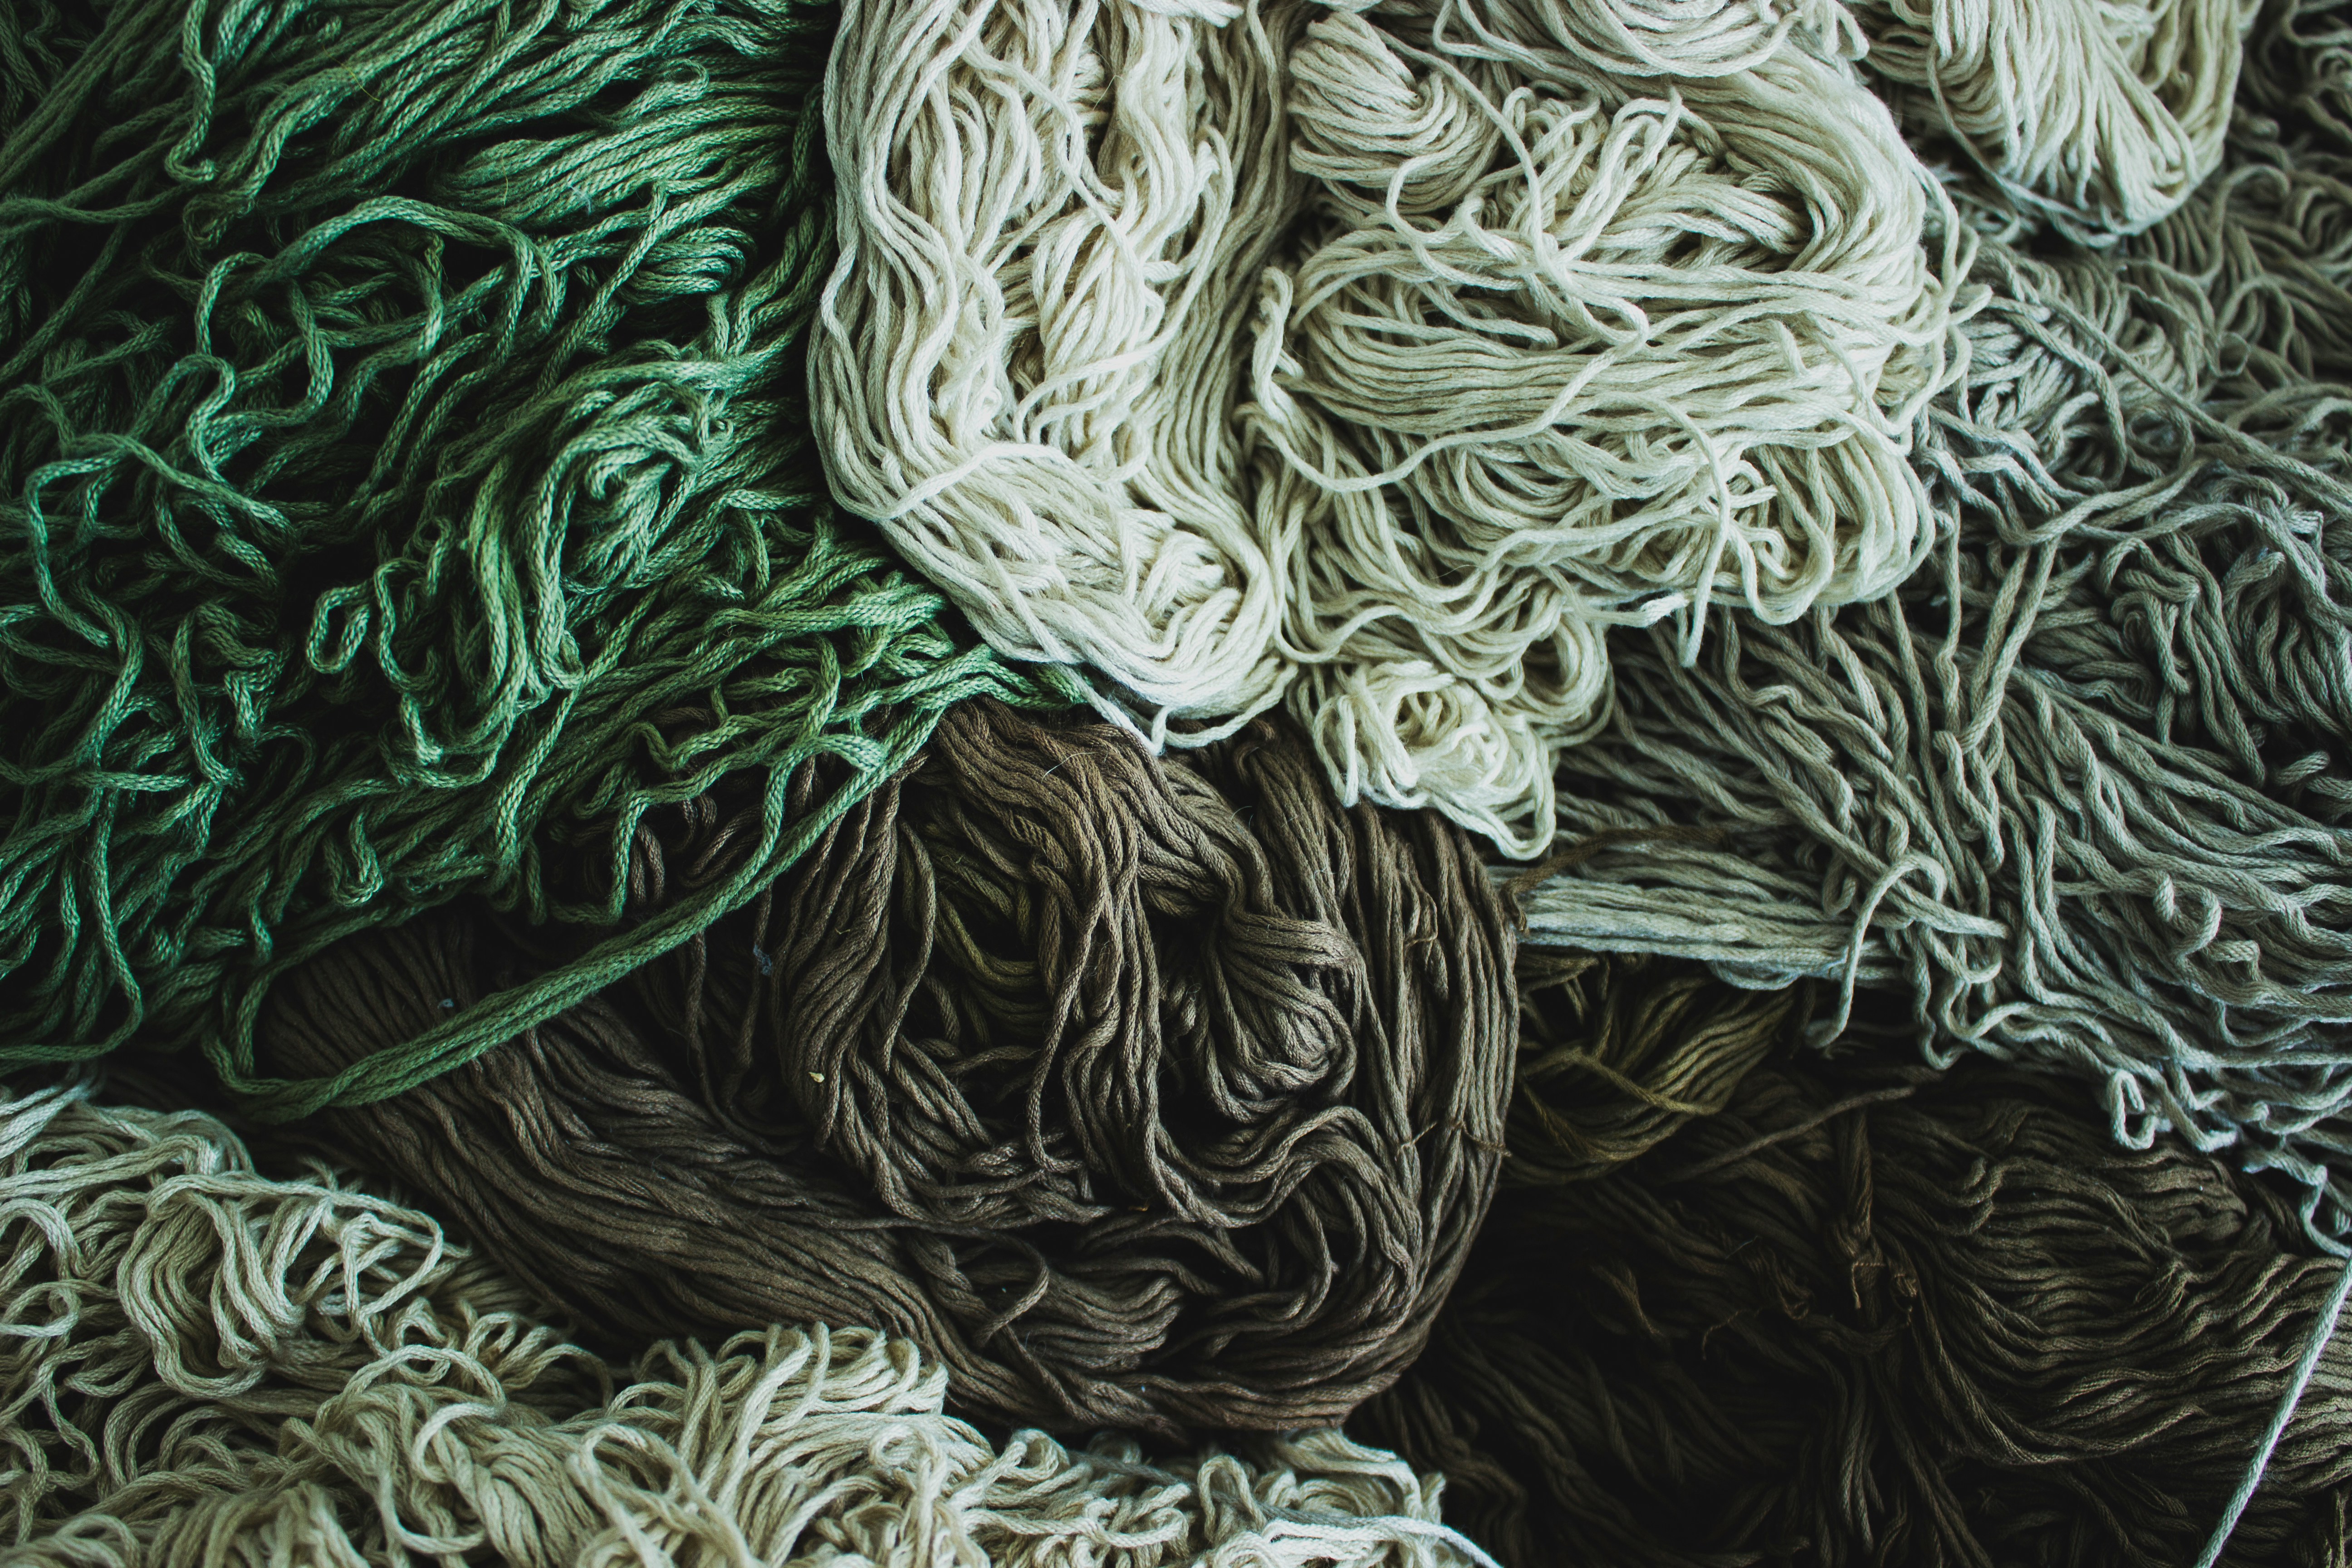 Low Global Yarn Demand and Its Impact on Global Textile Exports